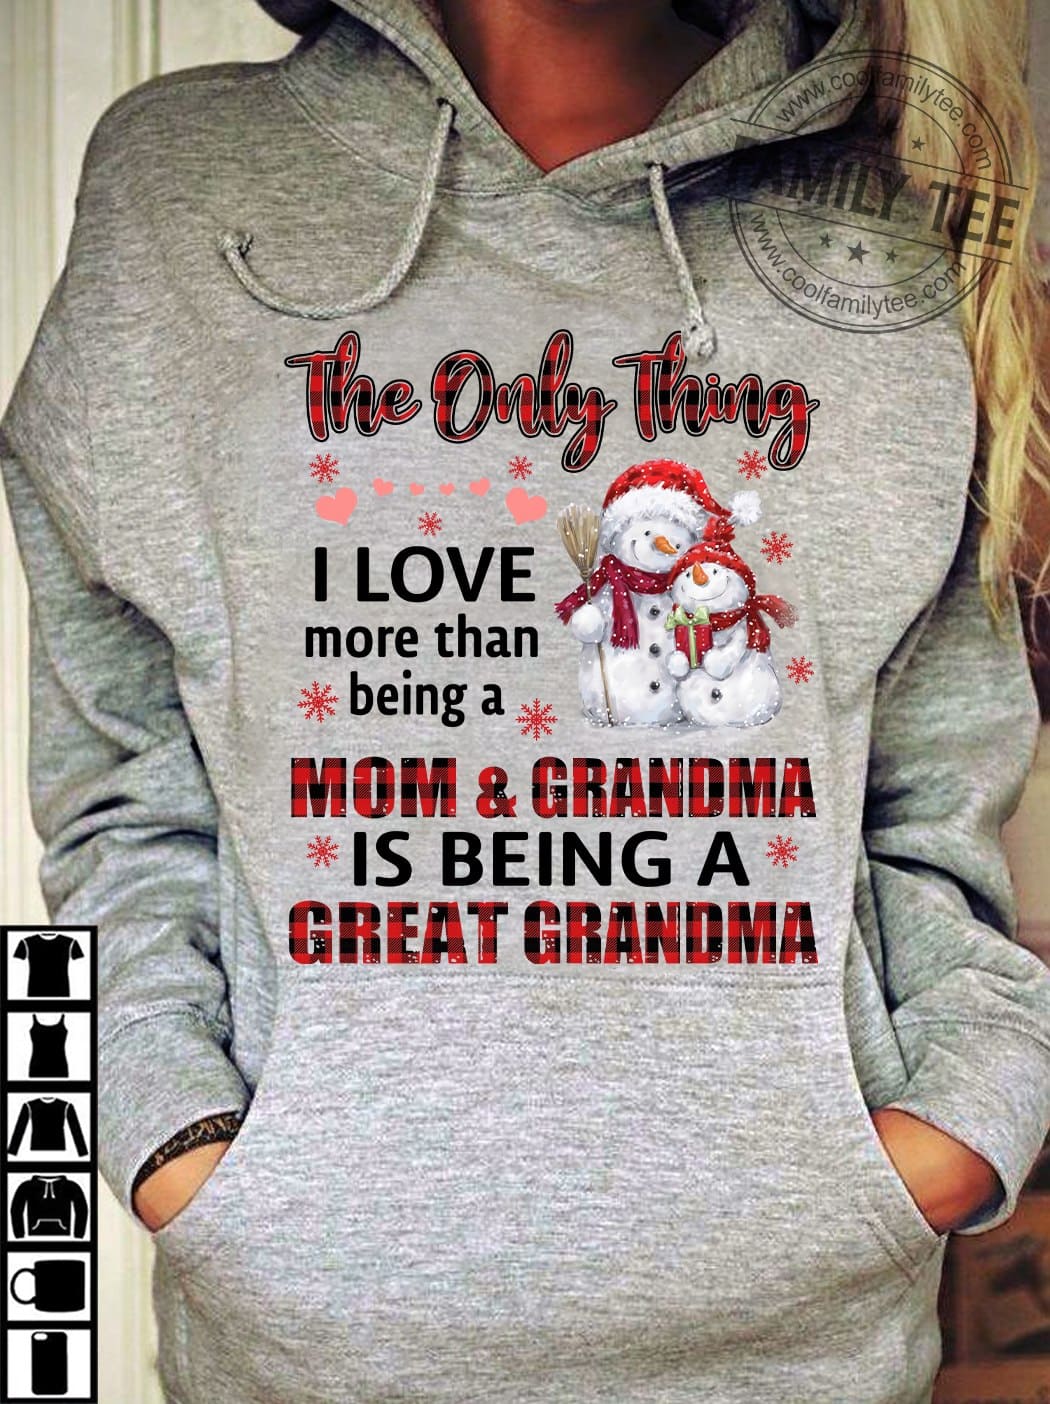 The only I love more than being a mom and grandma is being great grandma - Snowman family